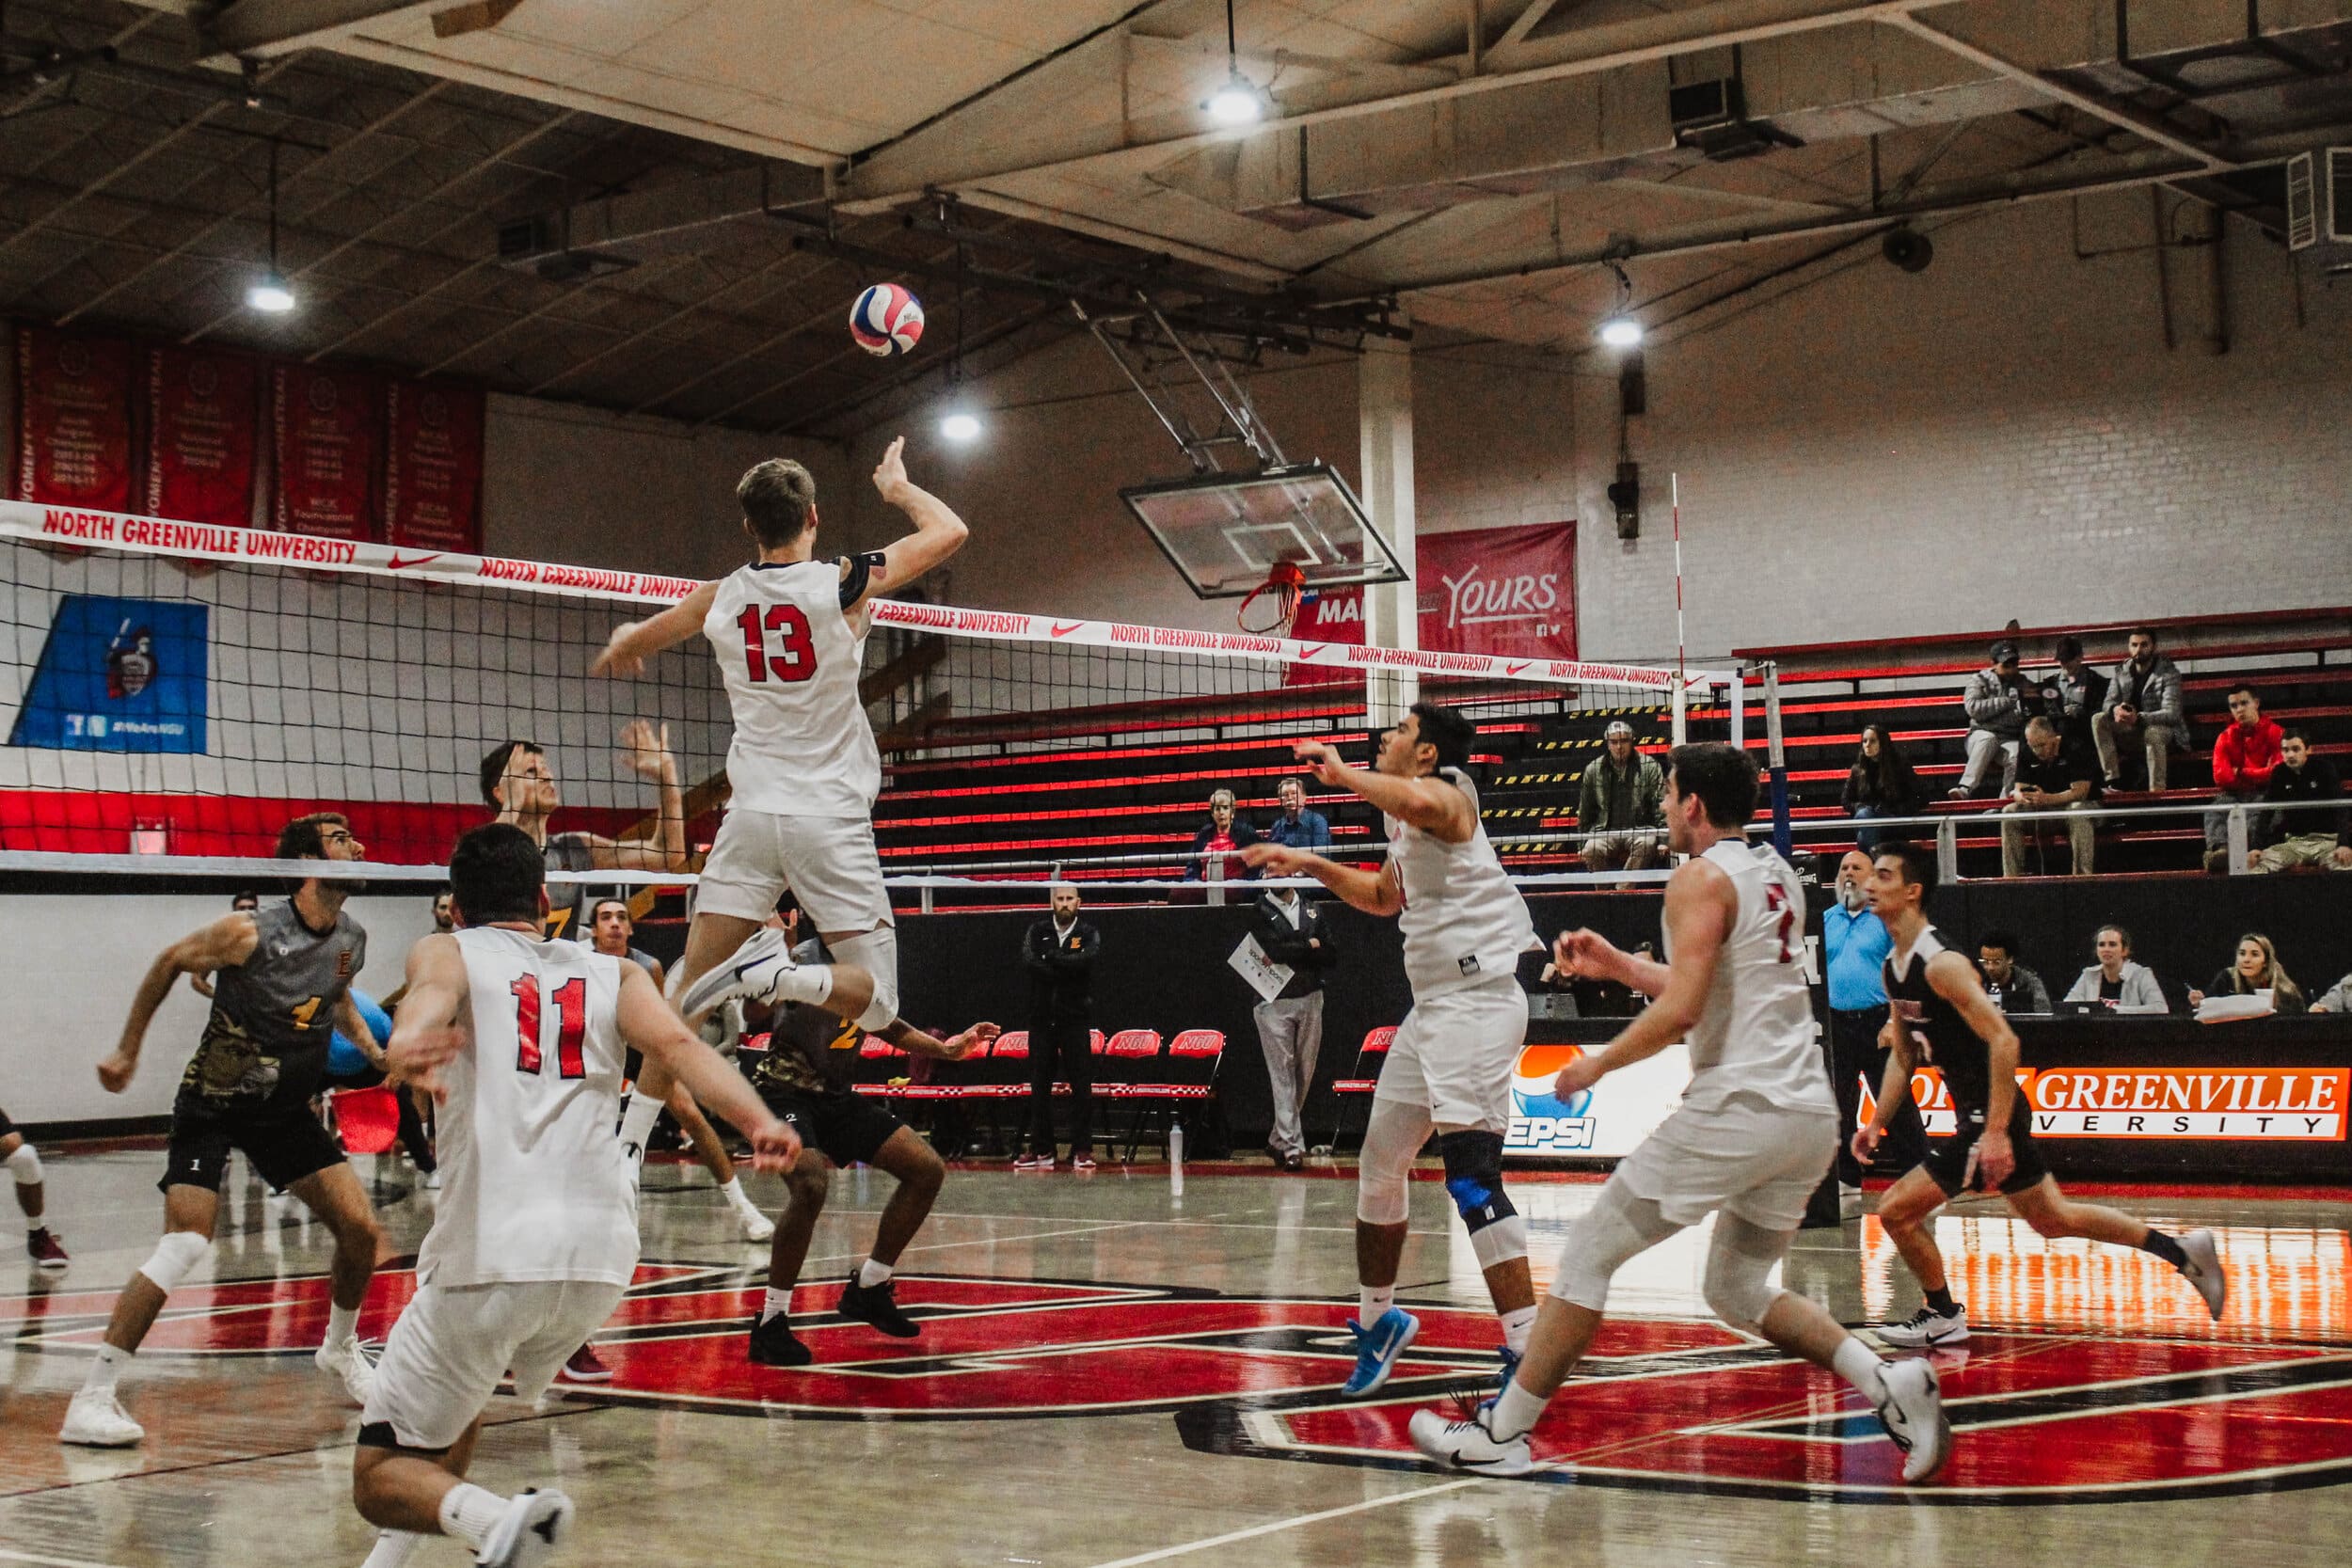 Senior Ben Hamsho (13), spikes the ball over the net, past the opposing teams blockers, for a point.